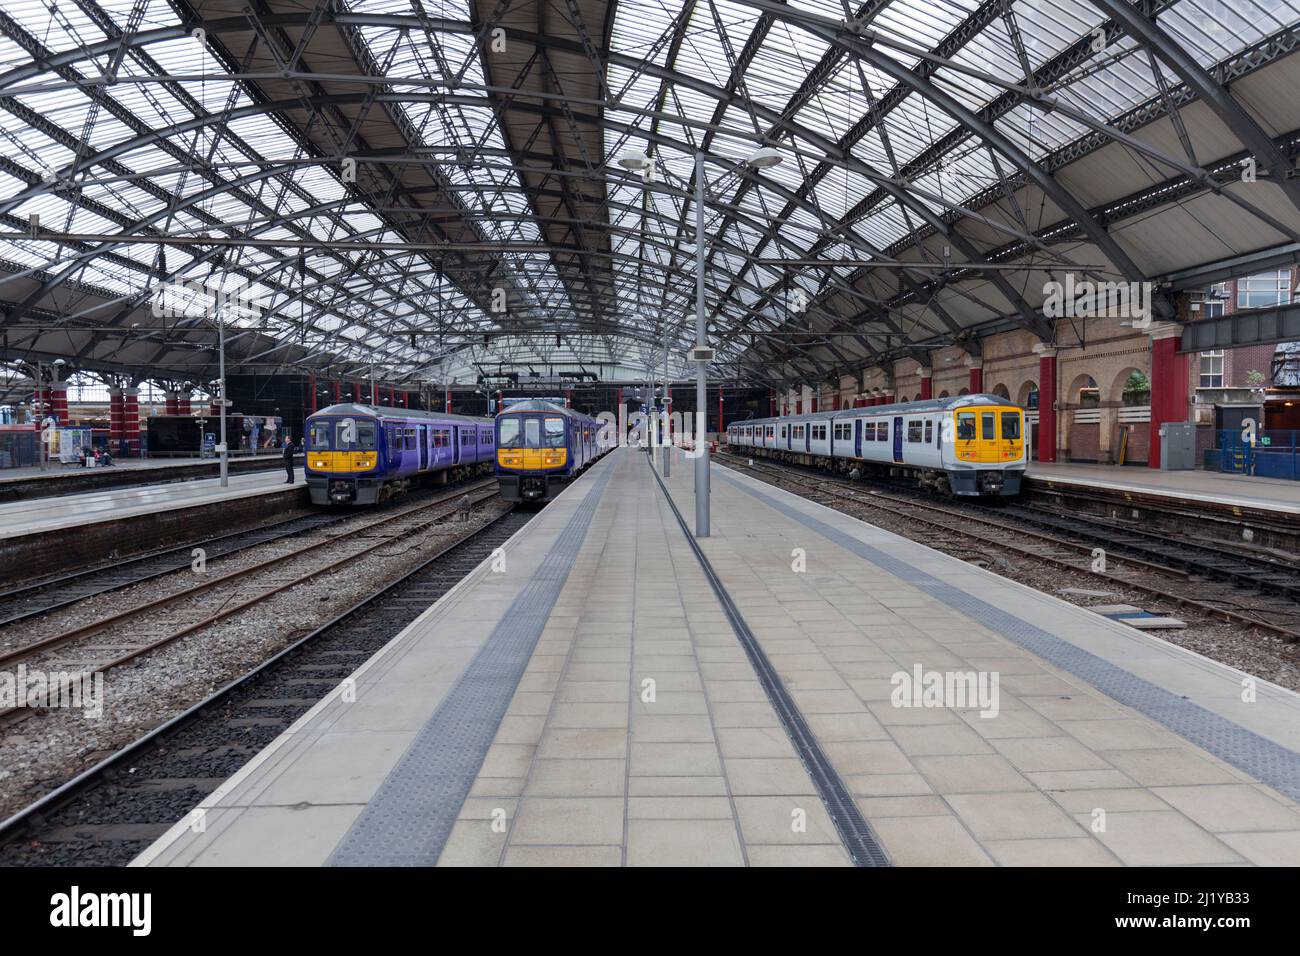 Northern rail class 319 electric multiple unit trains 319367, 319386, 319366 at  Liverpool Lime Street  railway station under the train shed roof Stock Photo